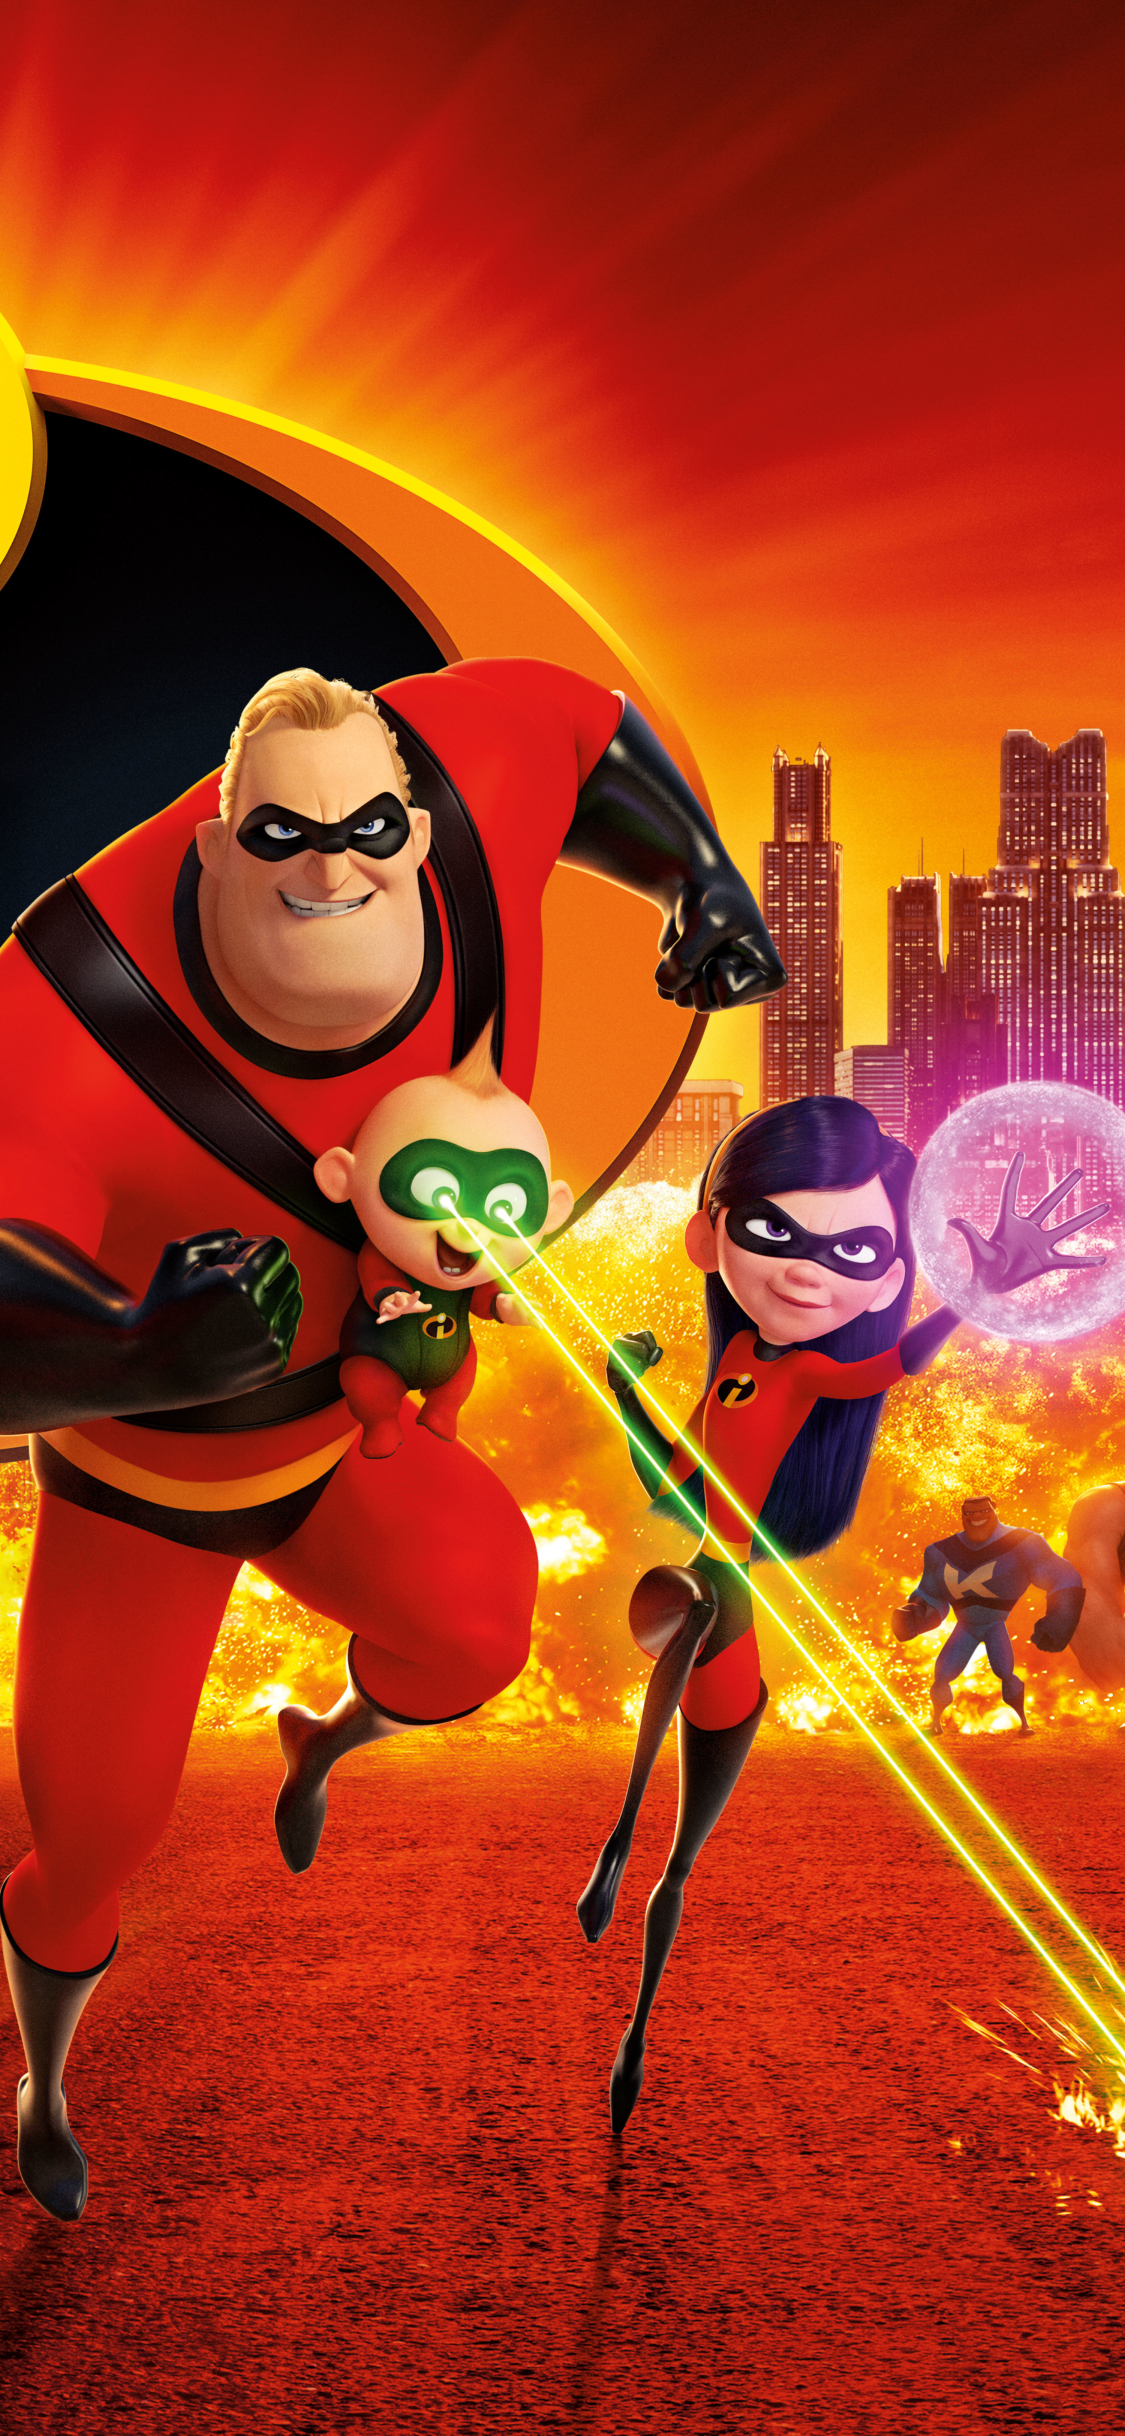 movie, incredibles 2, mr incredible, violet parr Full HD